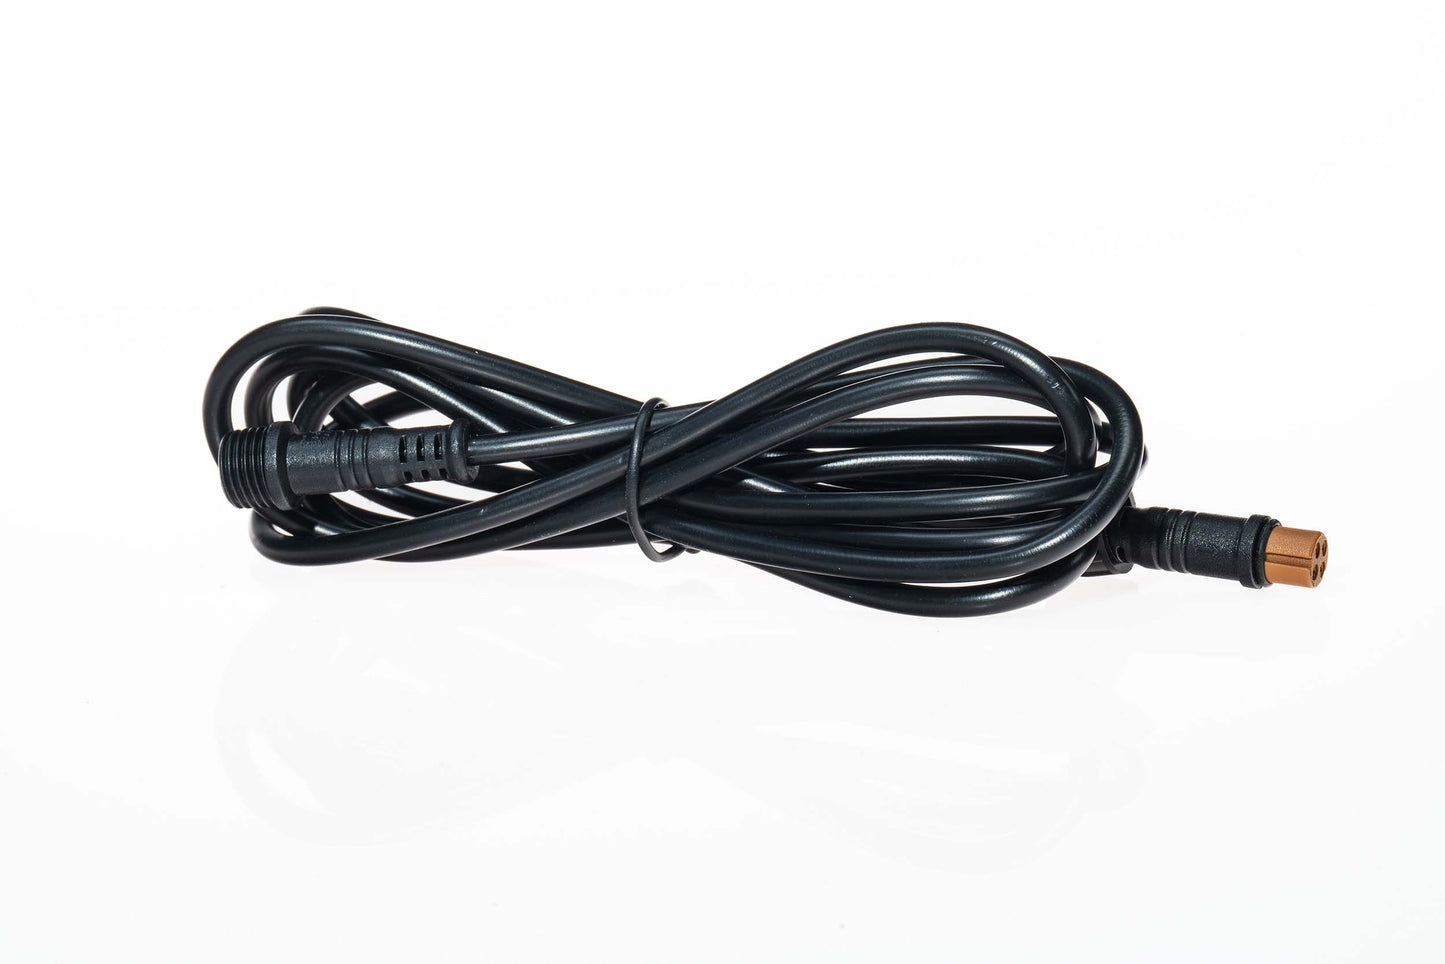 Morimoto Rock Light Parts: Full Size Truck Extension Cable (RGB / 73in / Single)